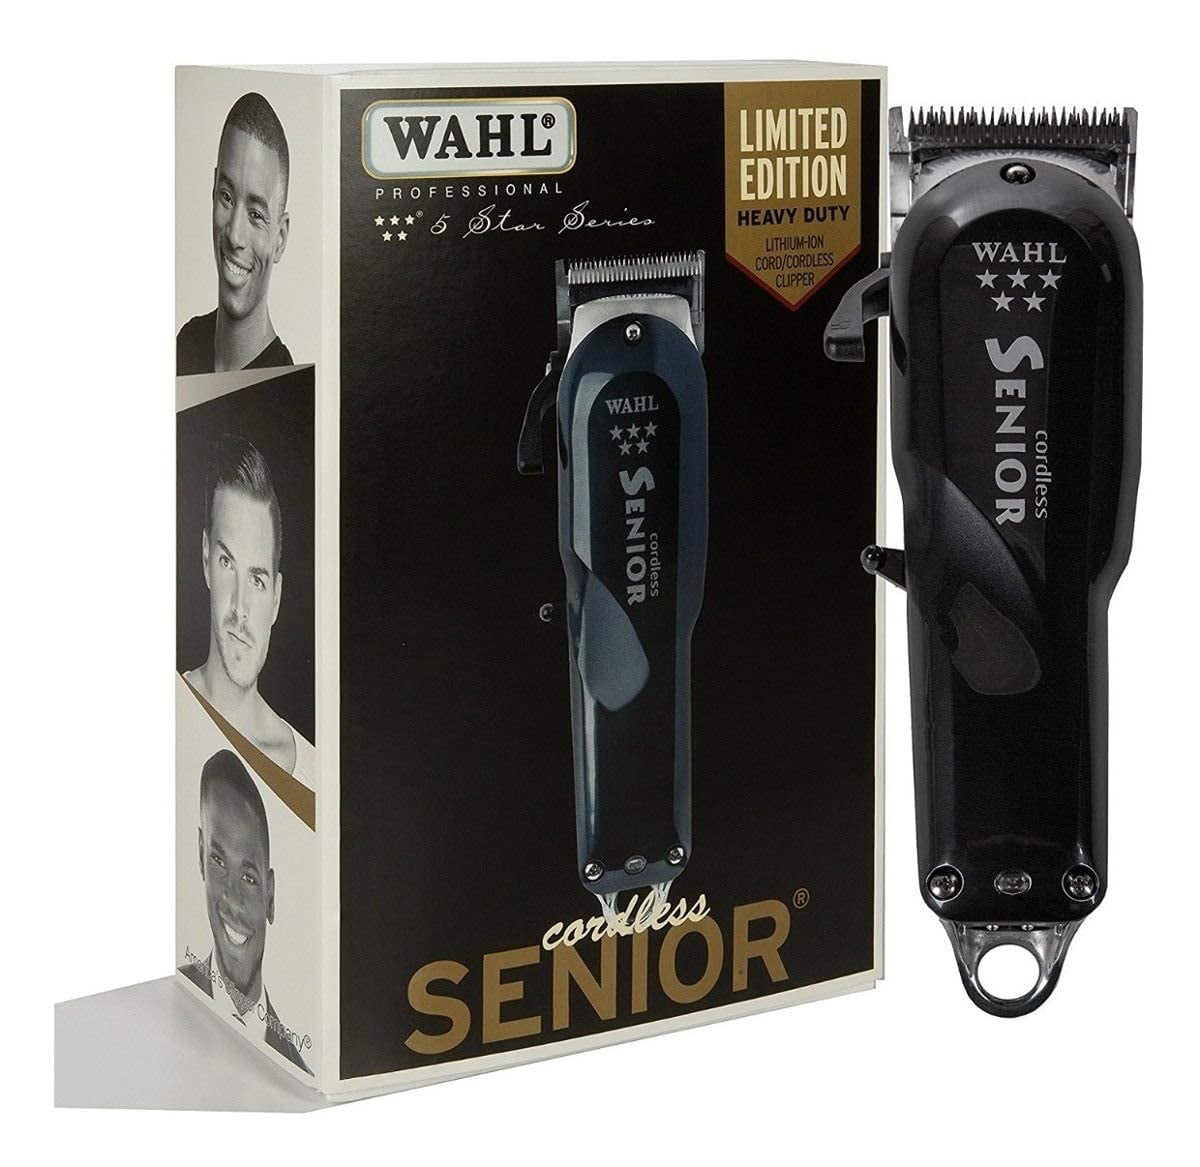 Wahl Professional 5 Star Cordless Senior Clipper with 70 Minute